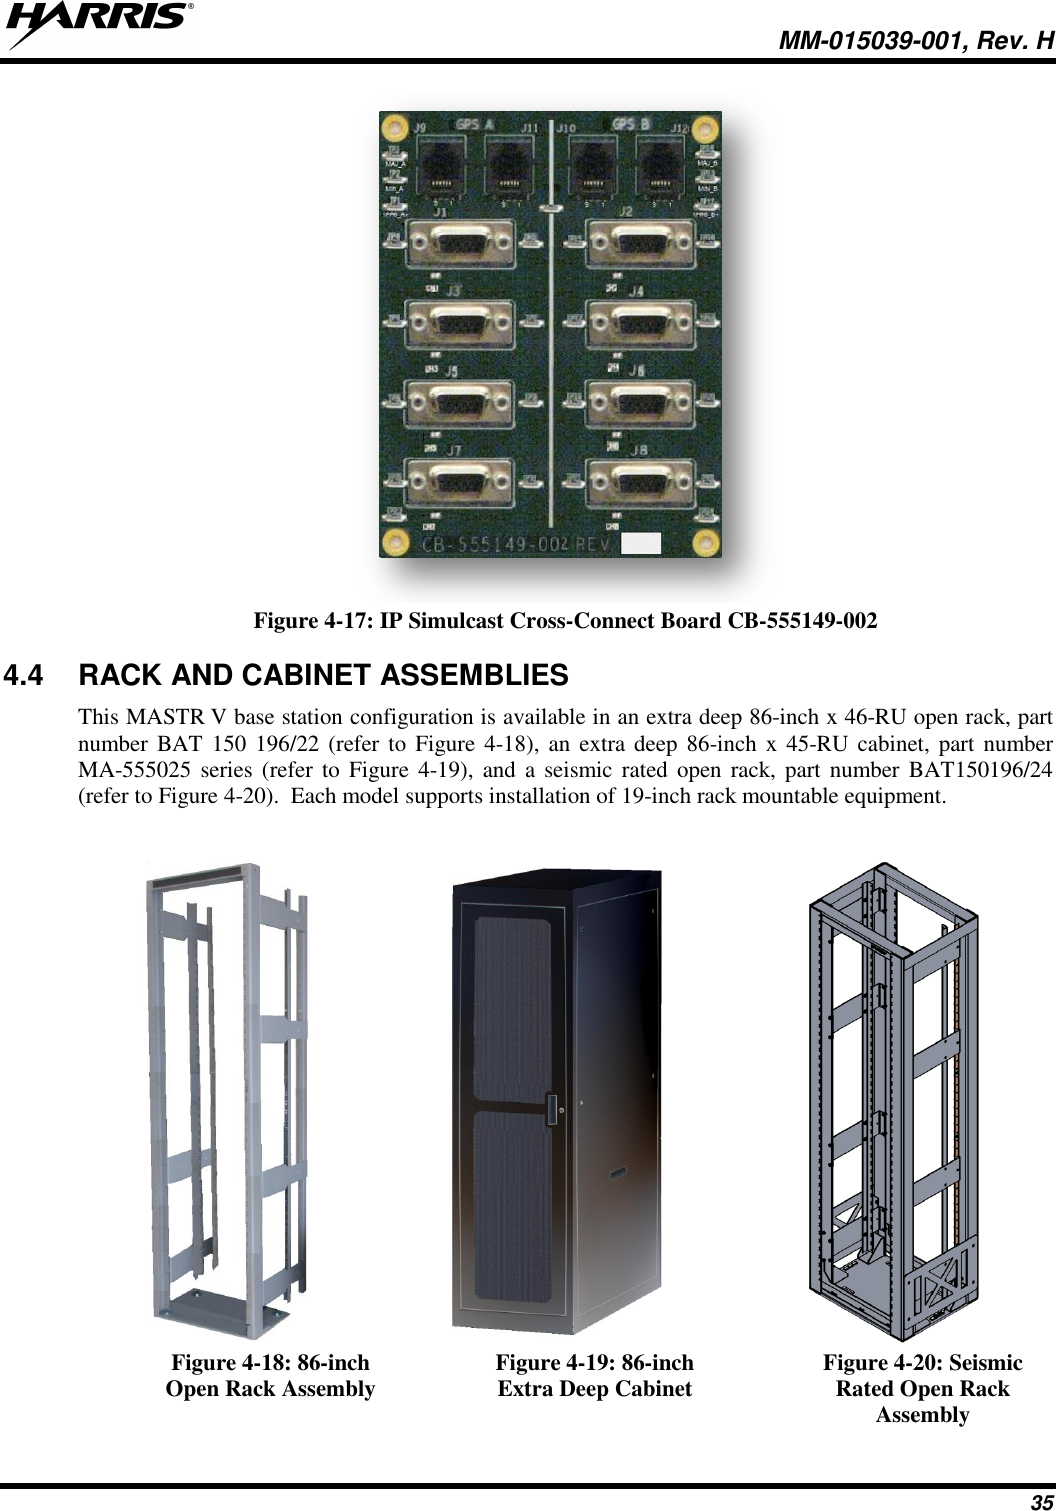   MM-015039-001, Rev. H 35  Figure 4-17: IP Simulcast Cross-Connect Board CB-555149-002 4.4  RACK AND CABINET ASSEMBLIES This MASTR V base station configuration is available in an extra deep 86-inch x 46-RU open rack, part number BAT  150  196/22 (refer to Figure 4-18), an extra deep 86-inch  x  45-RU cabinet,  part  number MA-555025 series (refer to  Figure  4-19), and  a seismic  rated open rack, part number BAT150196/24 (refer to Figure 4-20).  Each model supports installation of 19-inch rack mountable equipment.      Figure 4-18: 86-inch Open Rack Assembly Figure 4-19: 86-inch Extra Deep Cabinet Figure 4-20: Seismic Rated Open Rack Assembly 